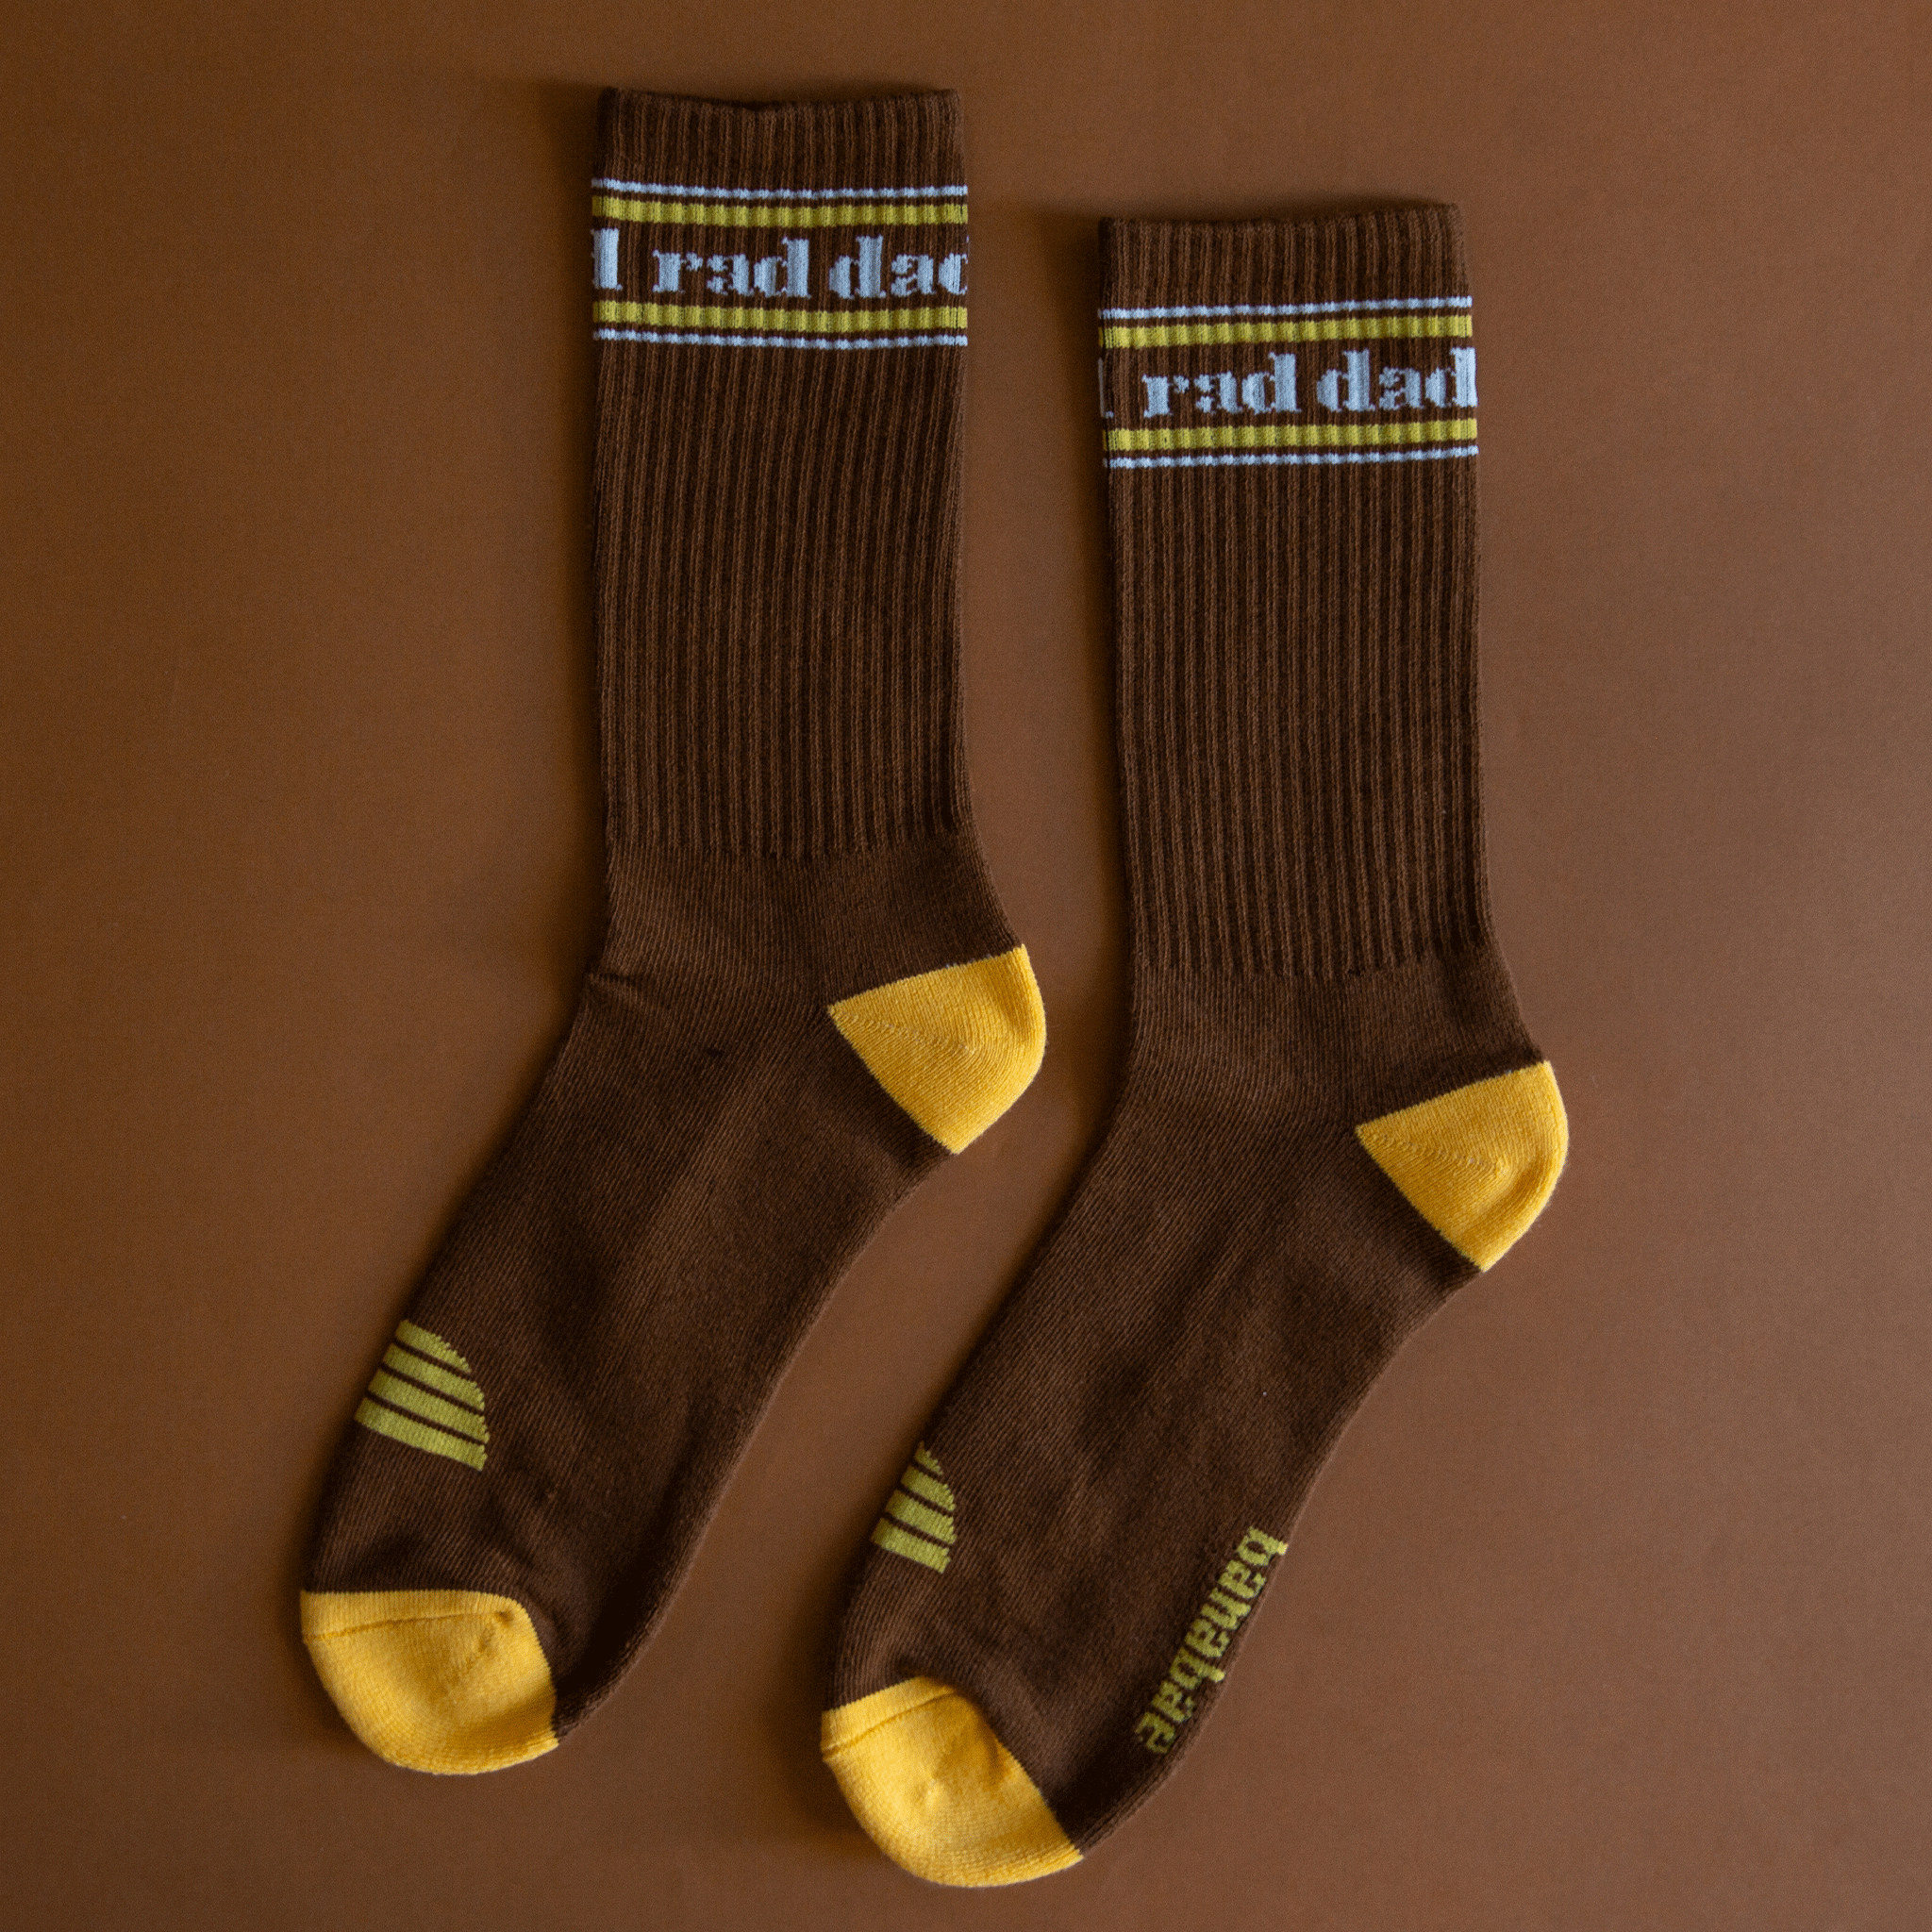 On a brown background is a pair of brown and yellow socks with white text at the top that reads, &quot;rad dad&quot;.